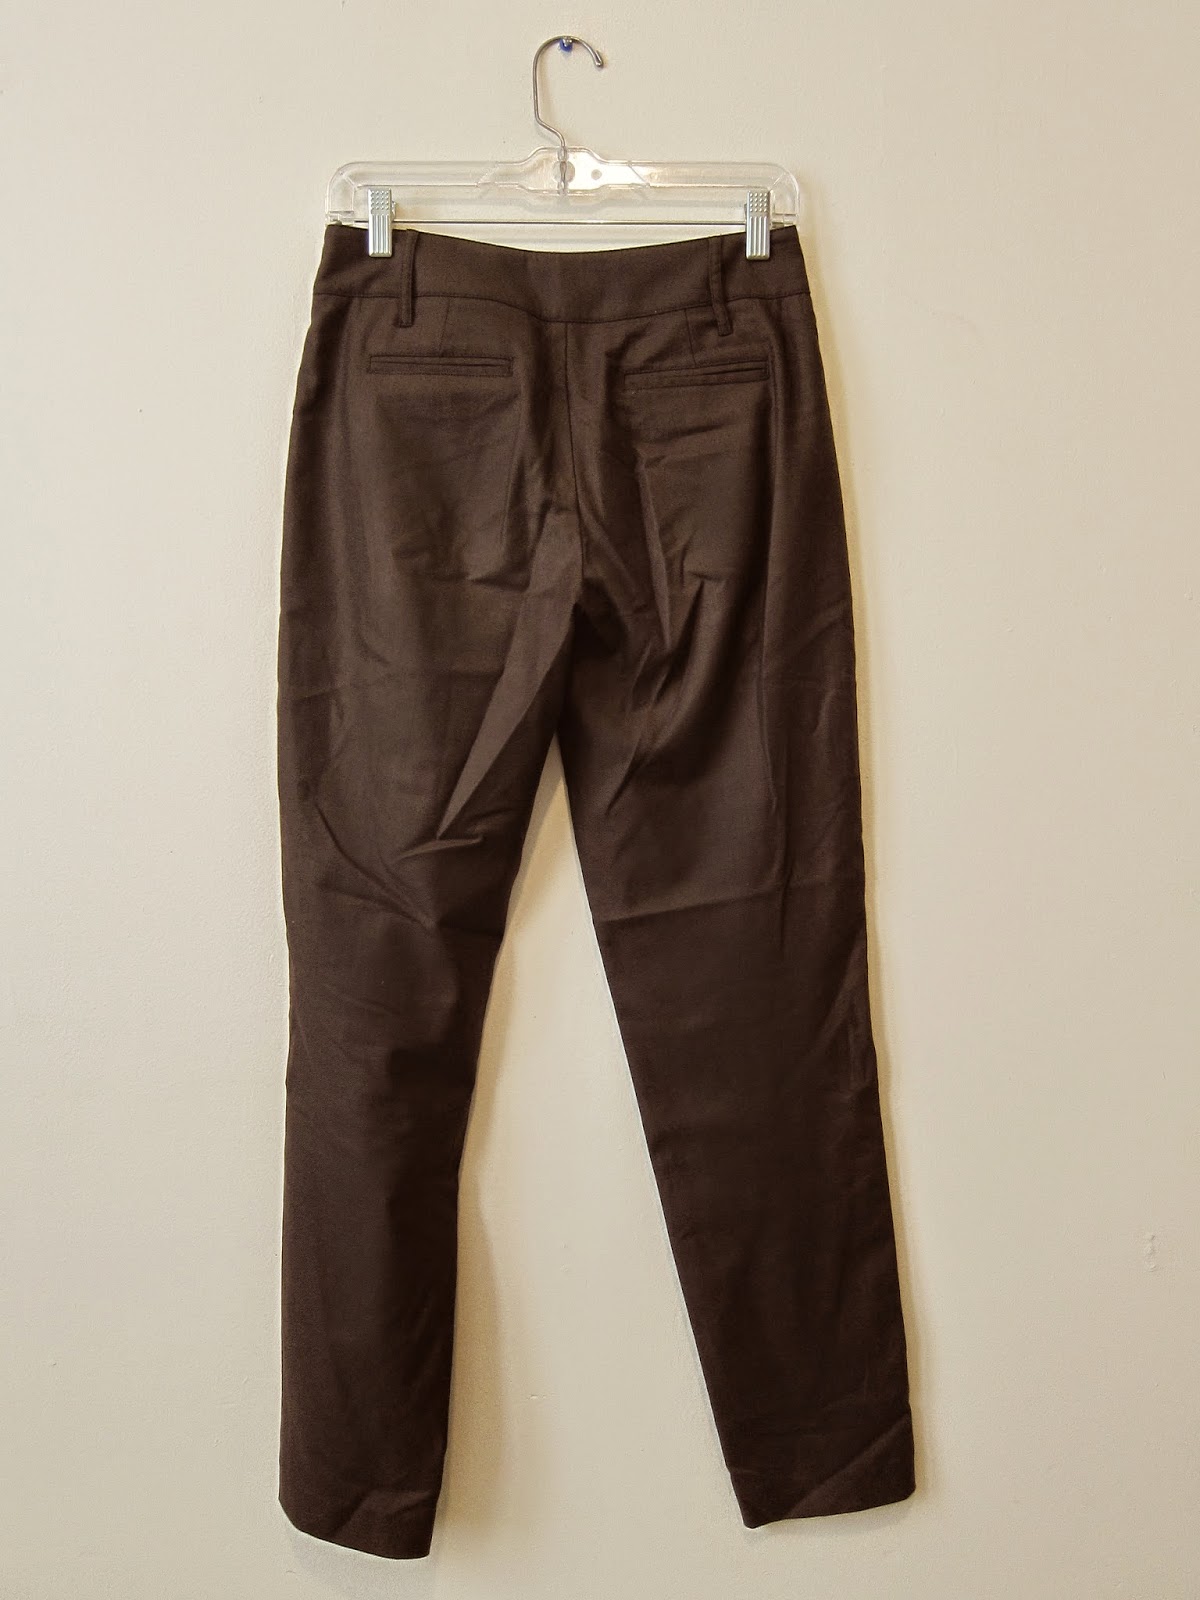 laws of general economy: Brown slim-fit pants, Size 6 (42)